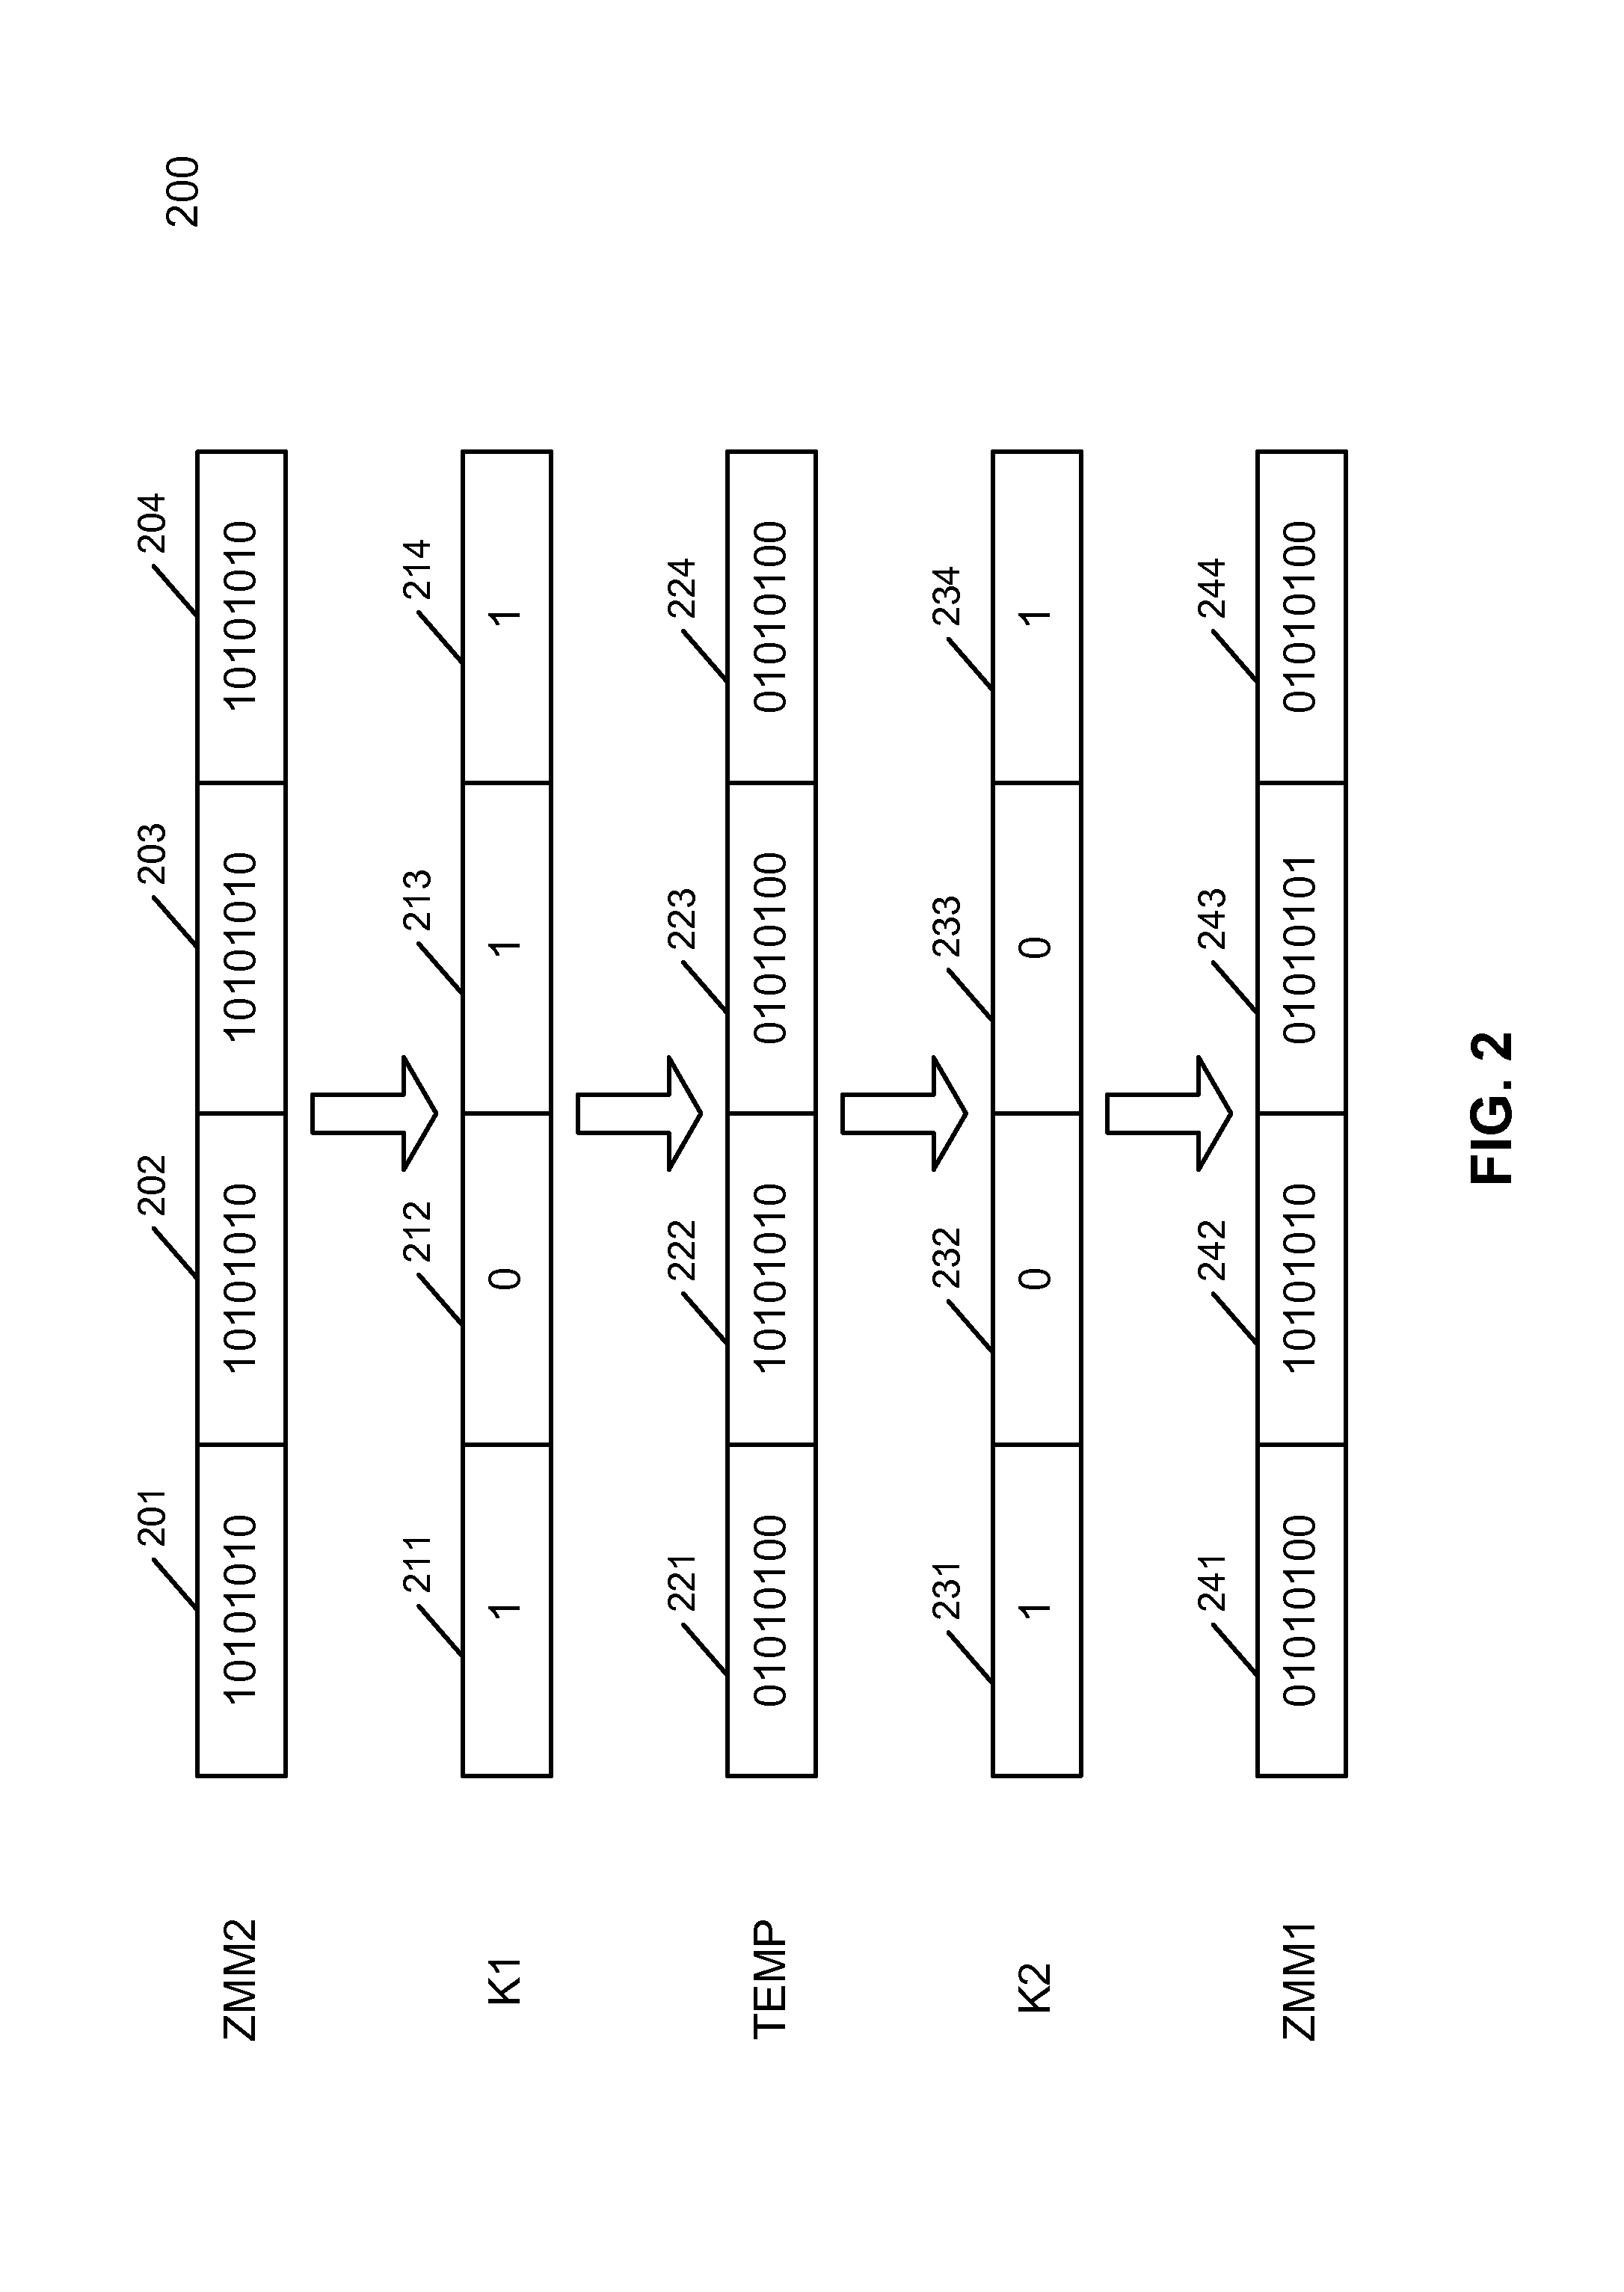 Instruction set for supporting wide scalar pattern matches